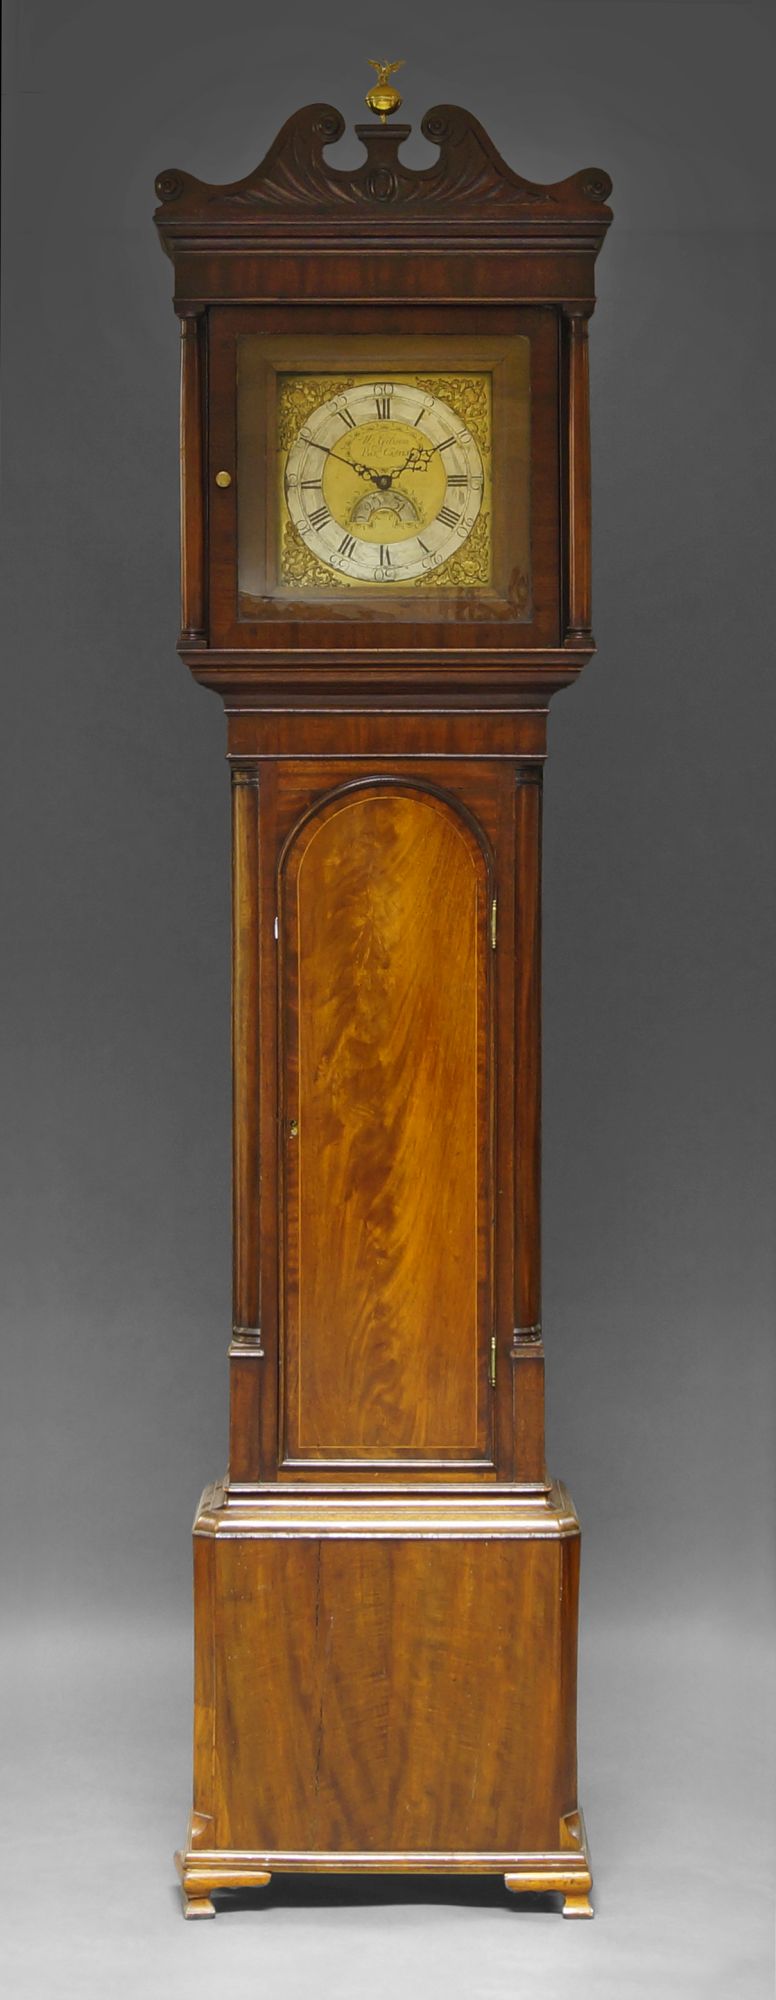 A mahogany long case clock by William Gibson, 18th century,